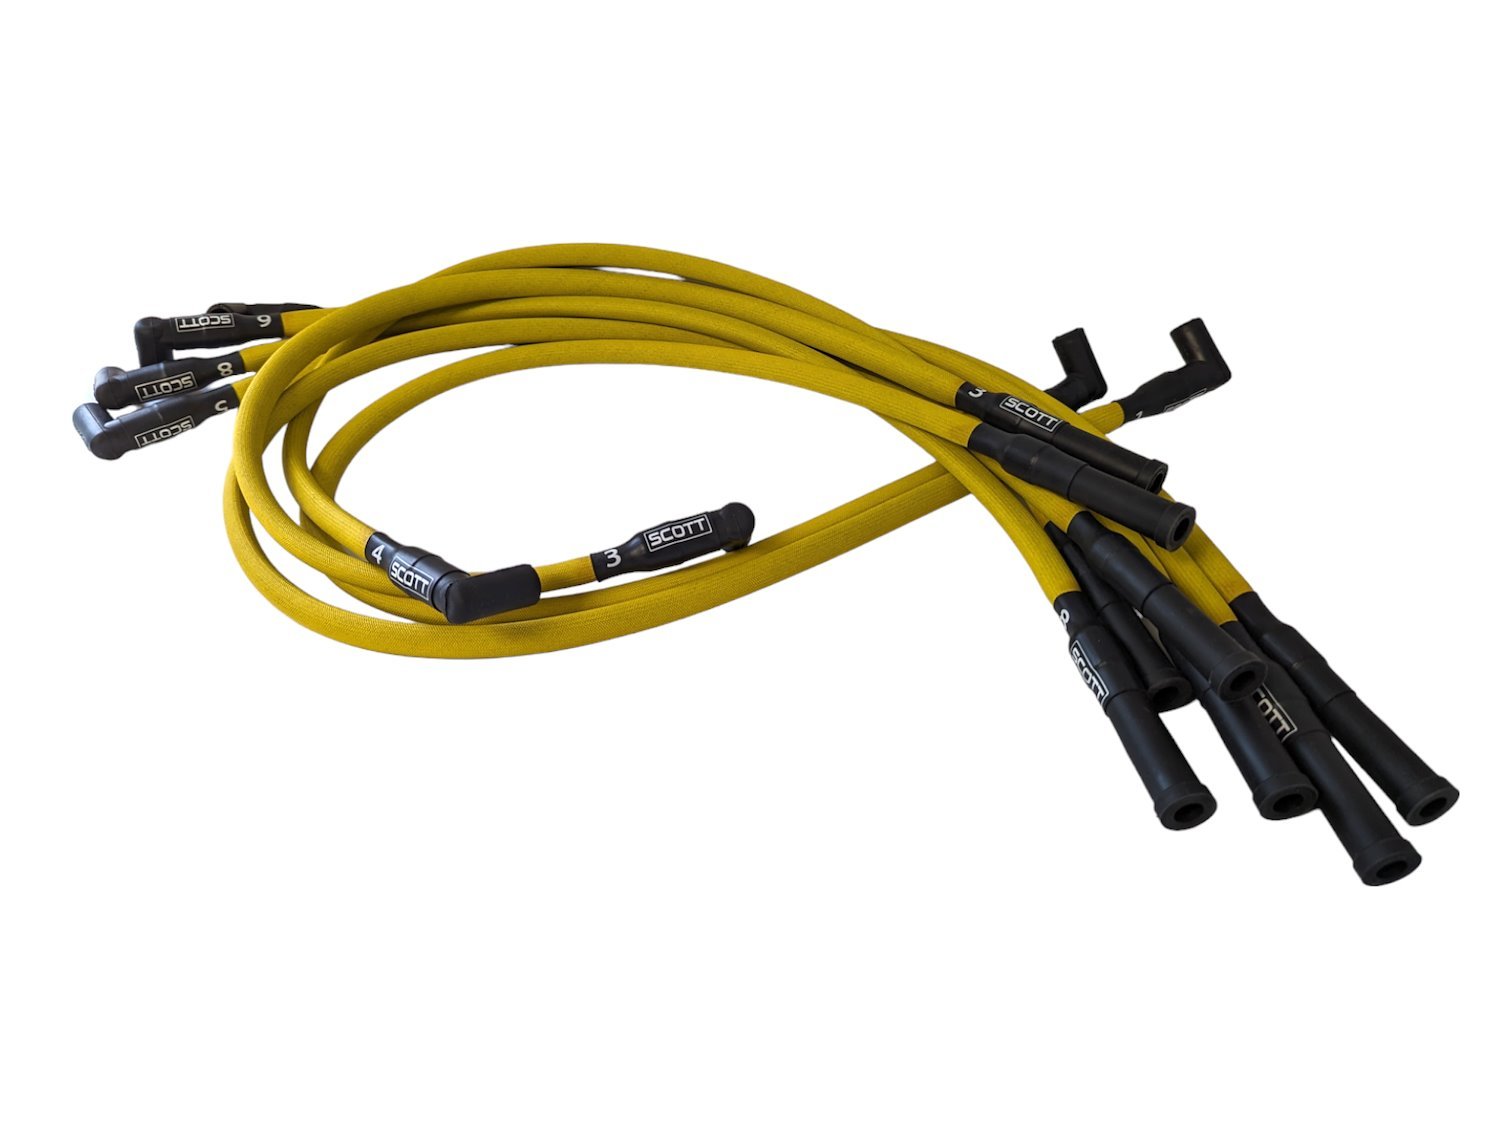 SPW-PS-660-5 High-Performance Fiberglass-Oversleeved Spark Plug Wire Set for Small Block Dodge [Yellow]